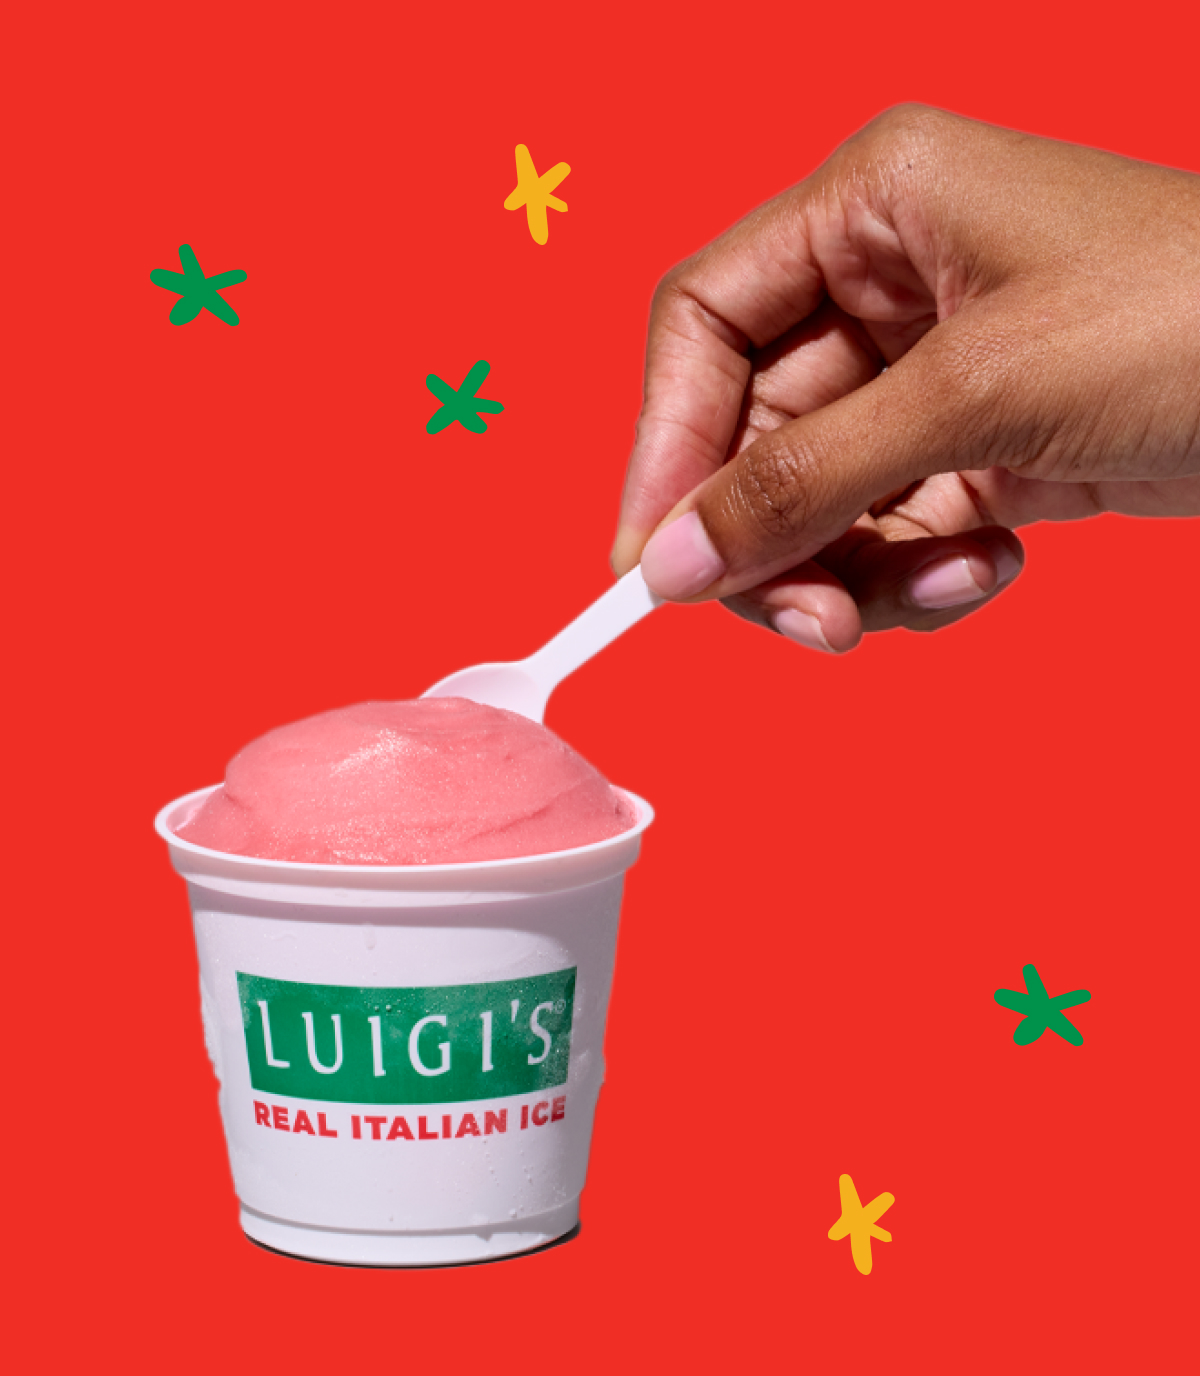 Hand scooping cherry LUIGI'S Real Italian Ice. Background is red with yellow and green stars.